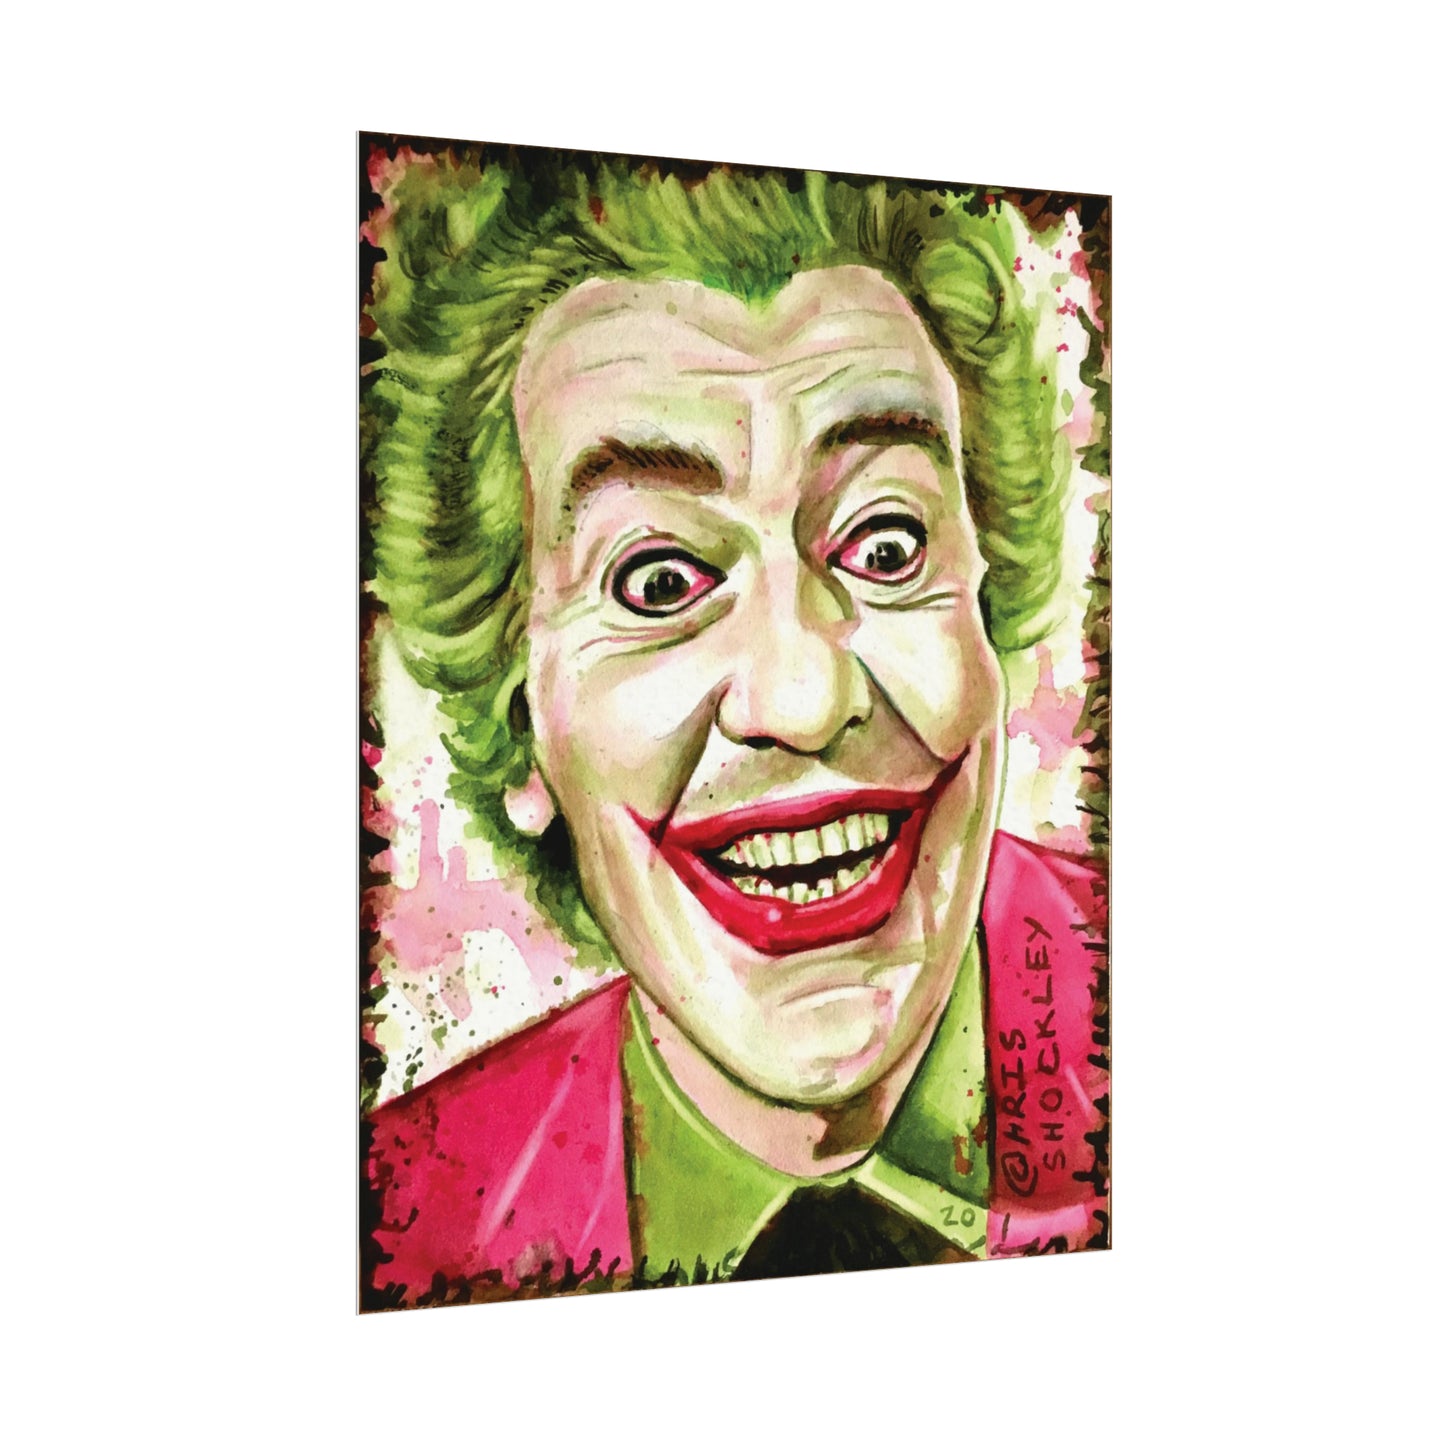 A Joke A Day Keeps the Gloom Away - Textured Watercolor Matte Print